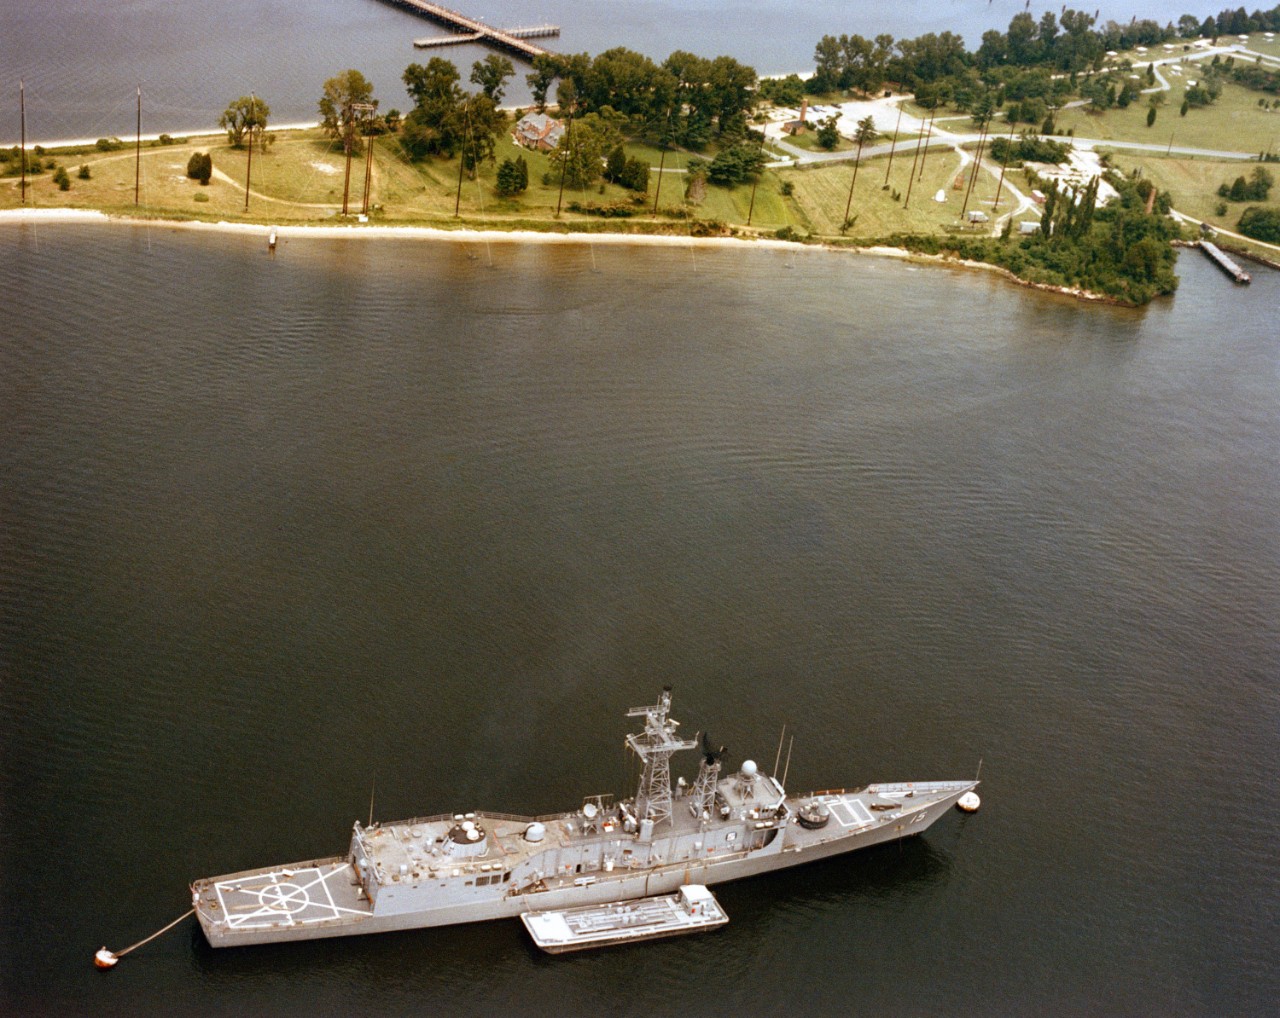 Estocin moored near the Electromagnetic Pulse Radiation Environmental Ship Simulator (EMPRESS) facility in Solomons, Md. (U.S. Navy Photograph DN-SC-86-03532, National Archives and Records Administration, Still Pictures Division, College Park, Md.)